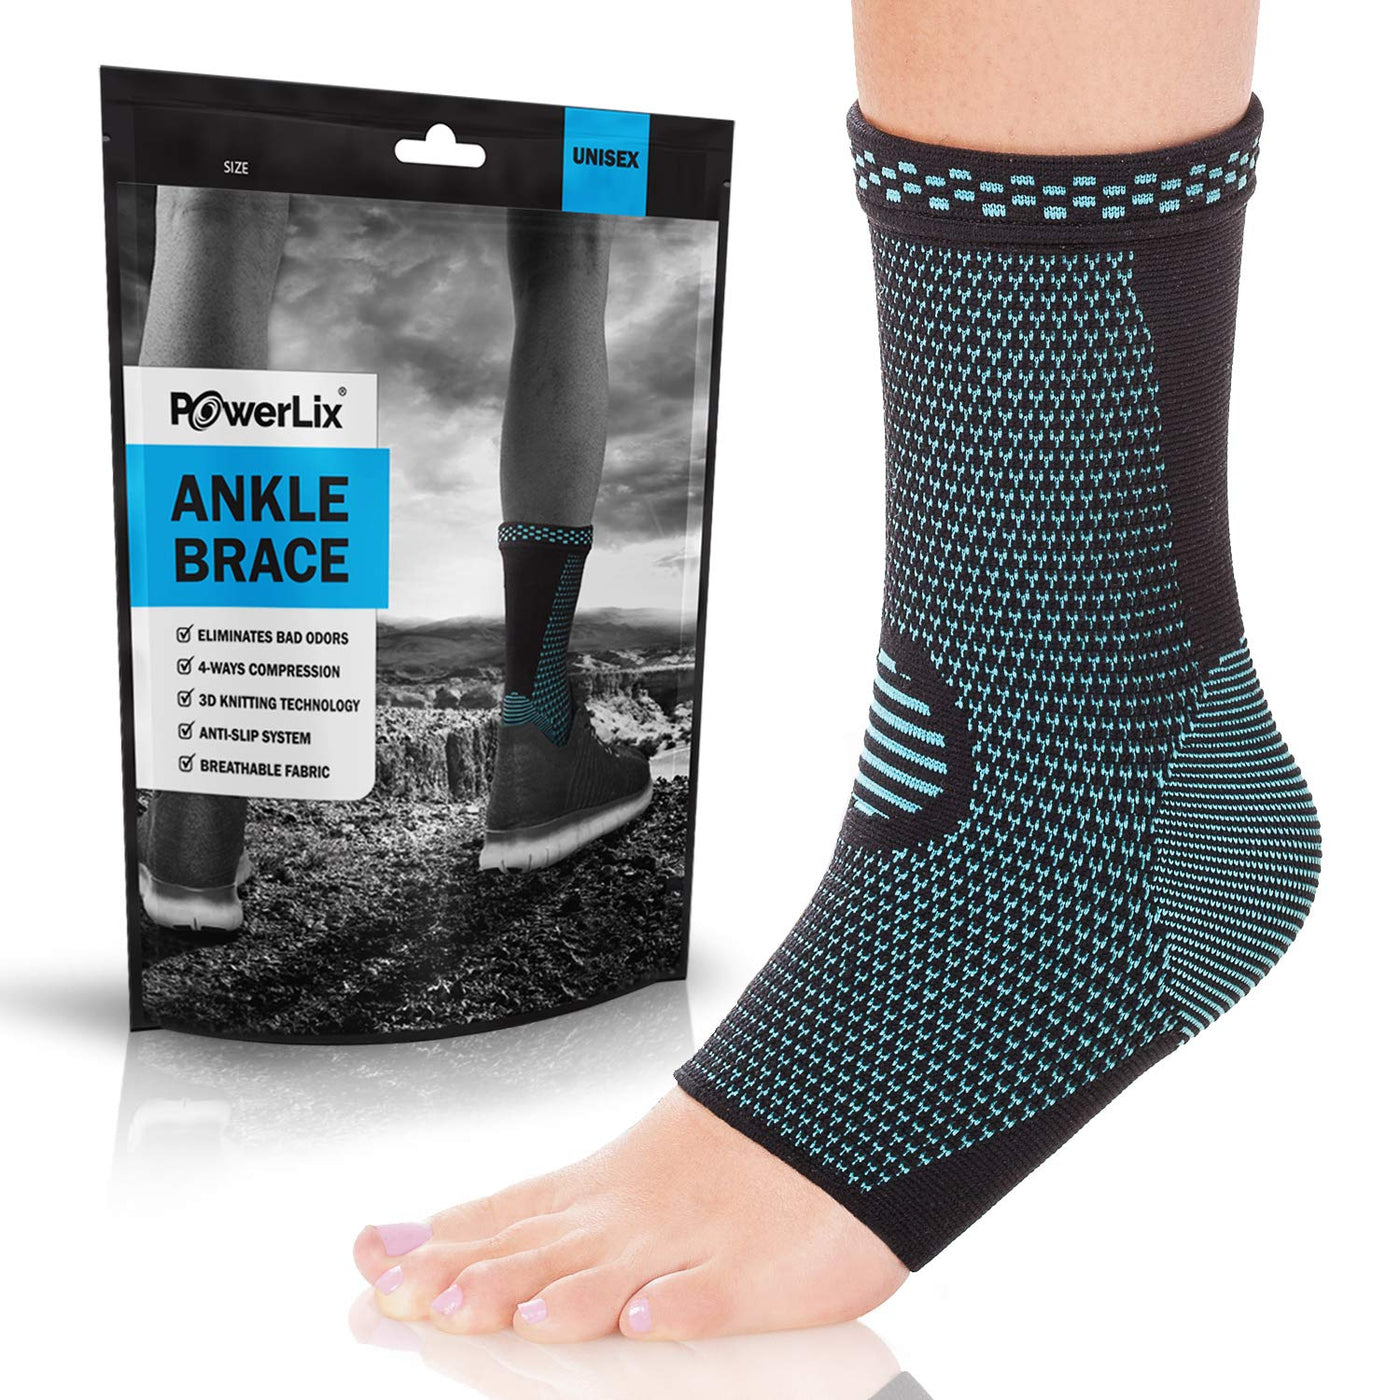 5 Best Ankle Braces for Arthritis - Ankle Arthritis Support Guide